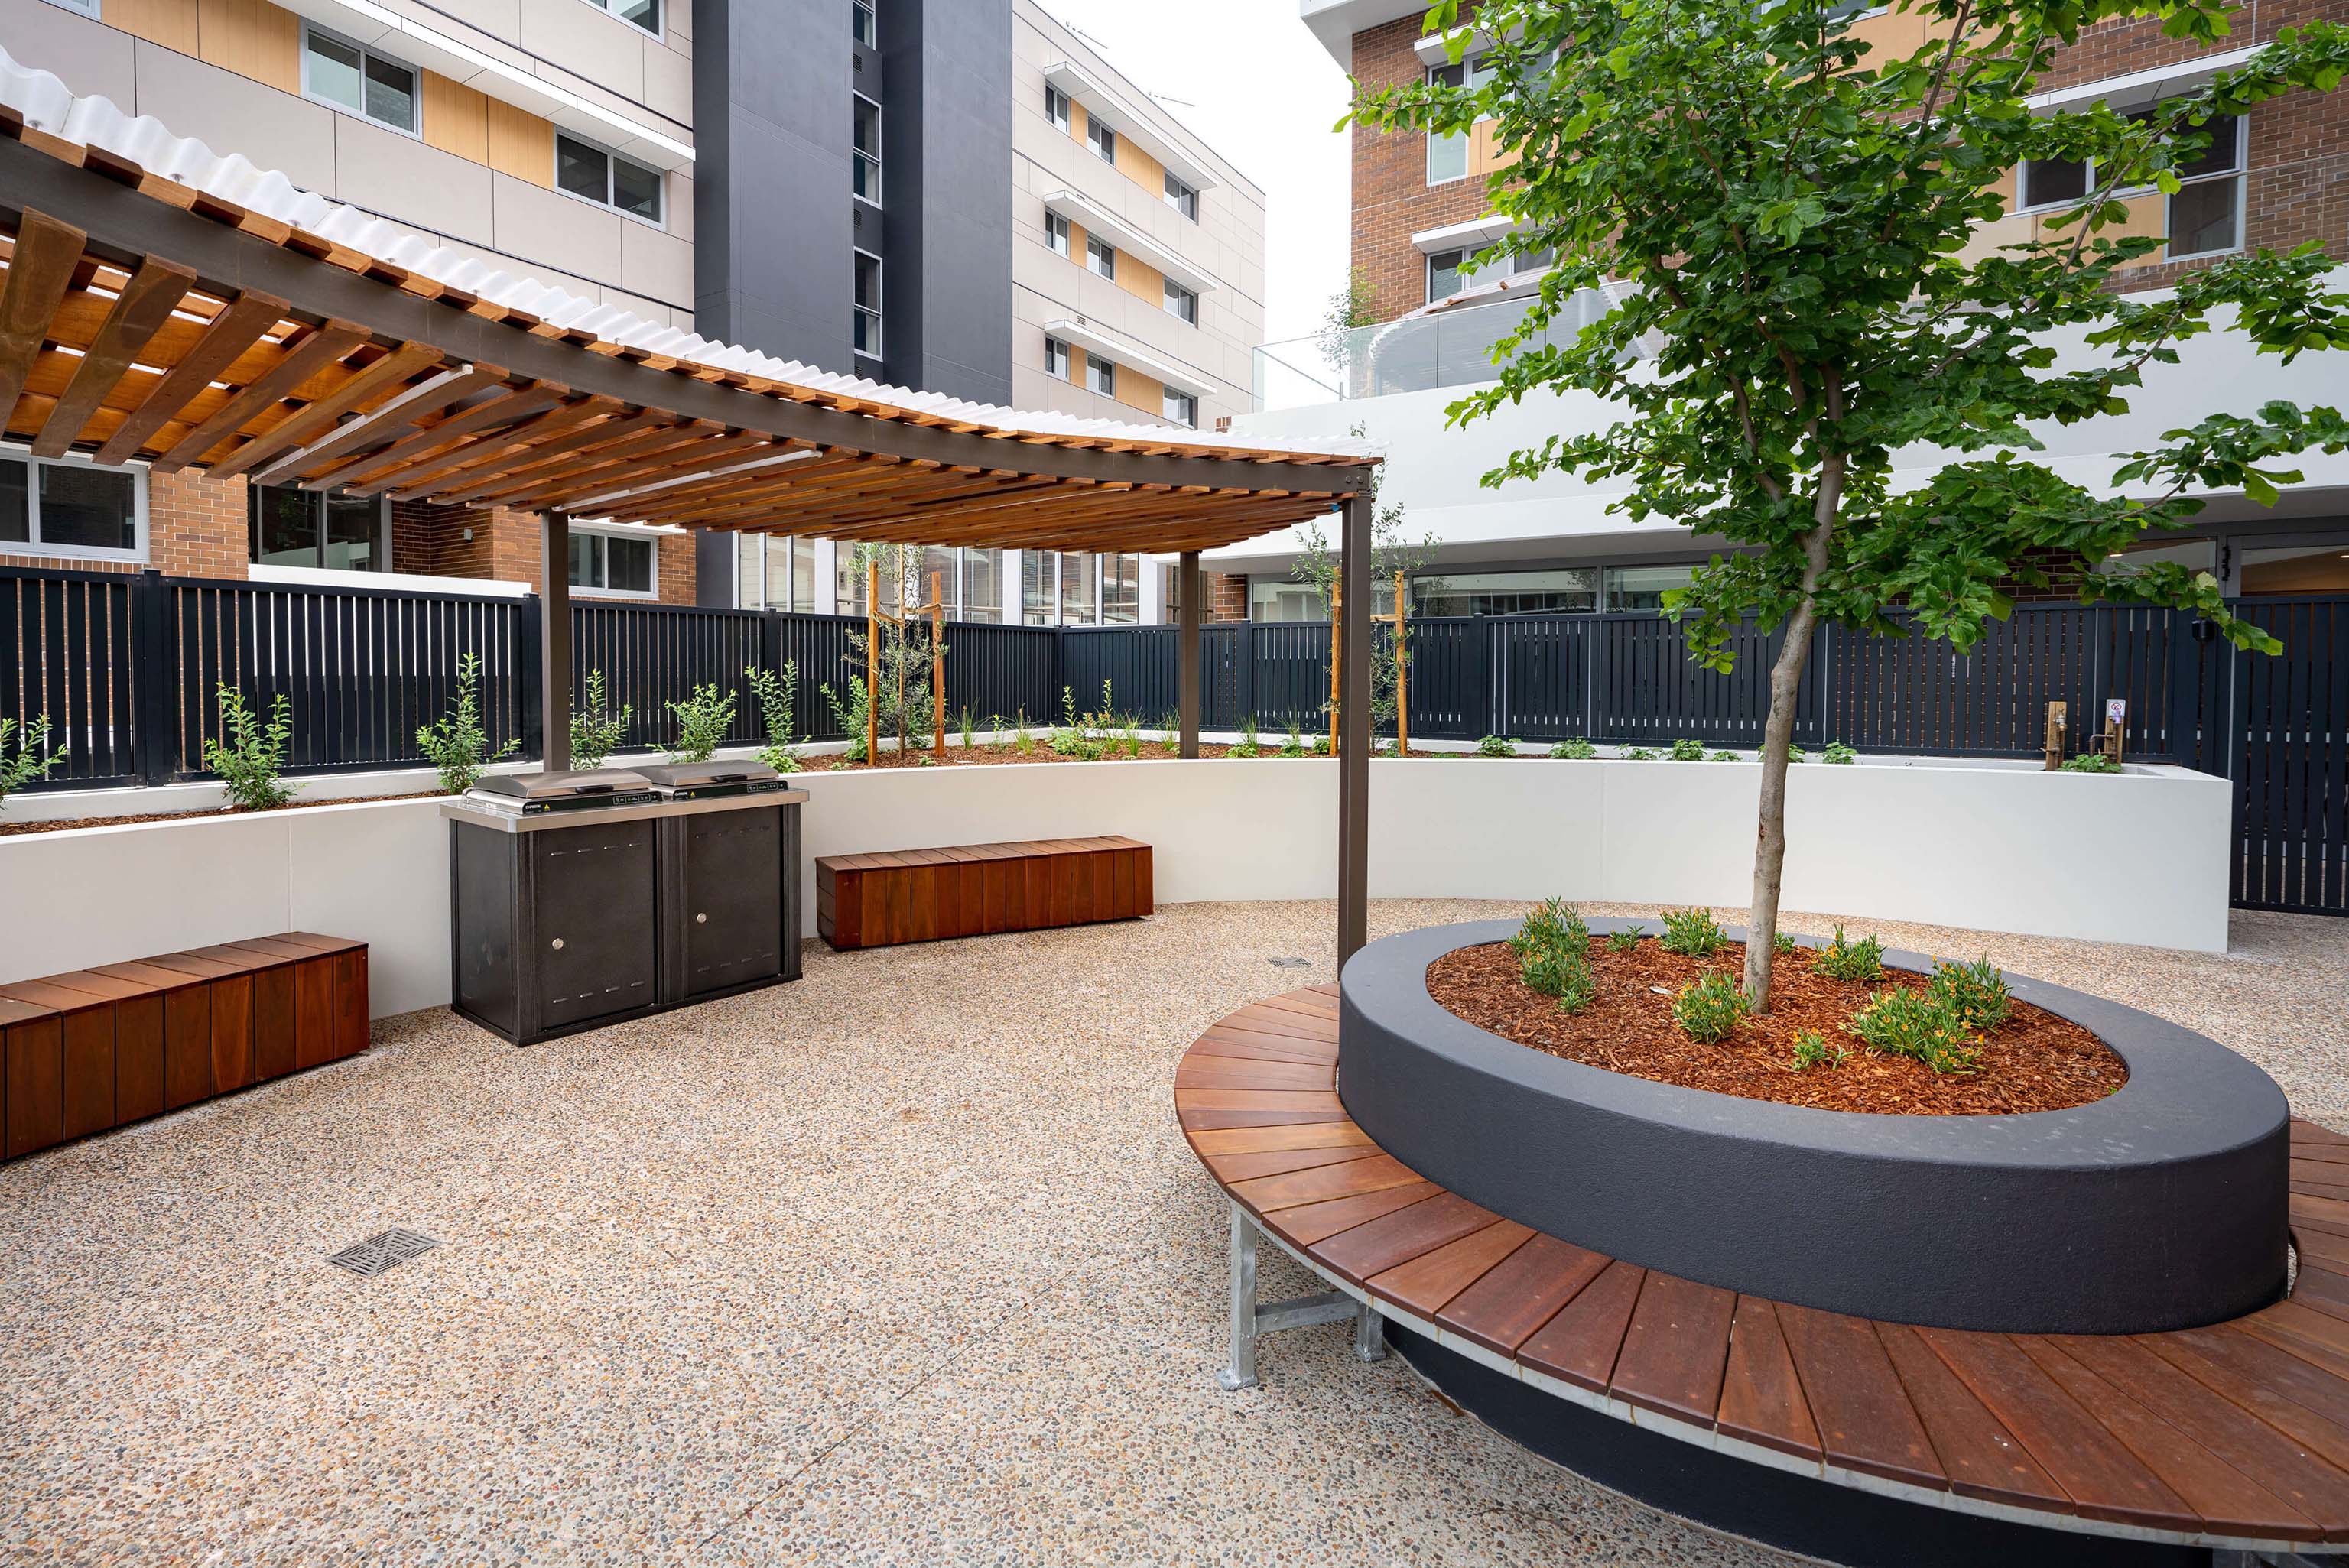 20 outdoor communal bbq facilities with shade area at uniting mayflower westmead taylor construction aged care